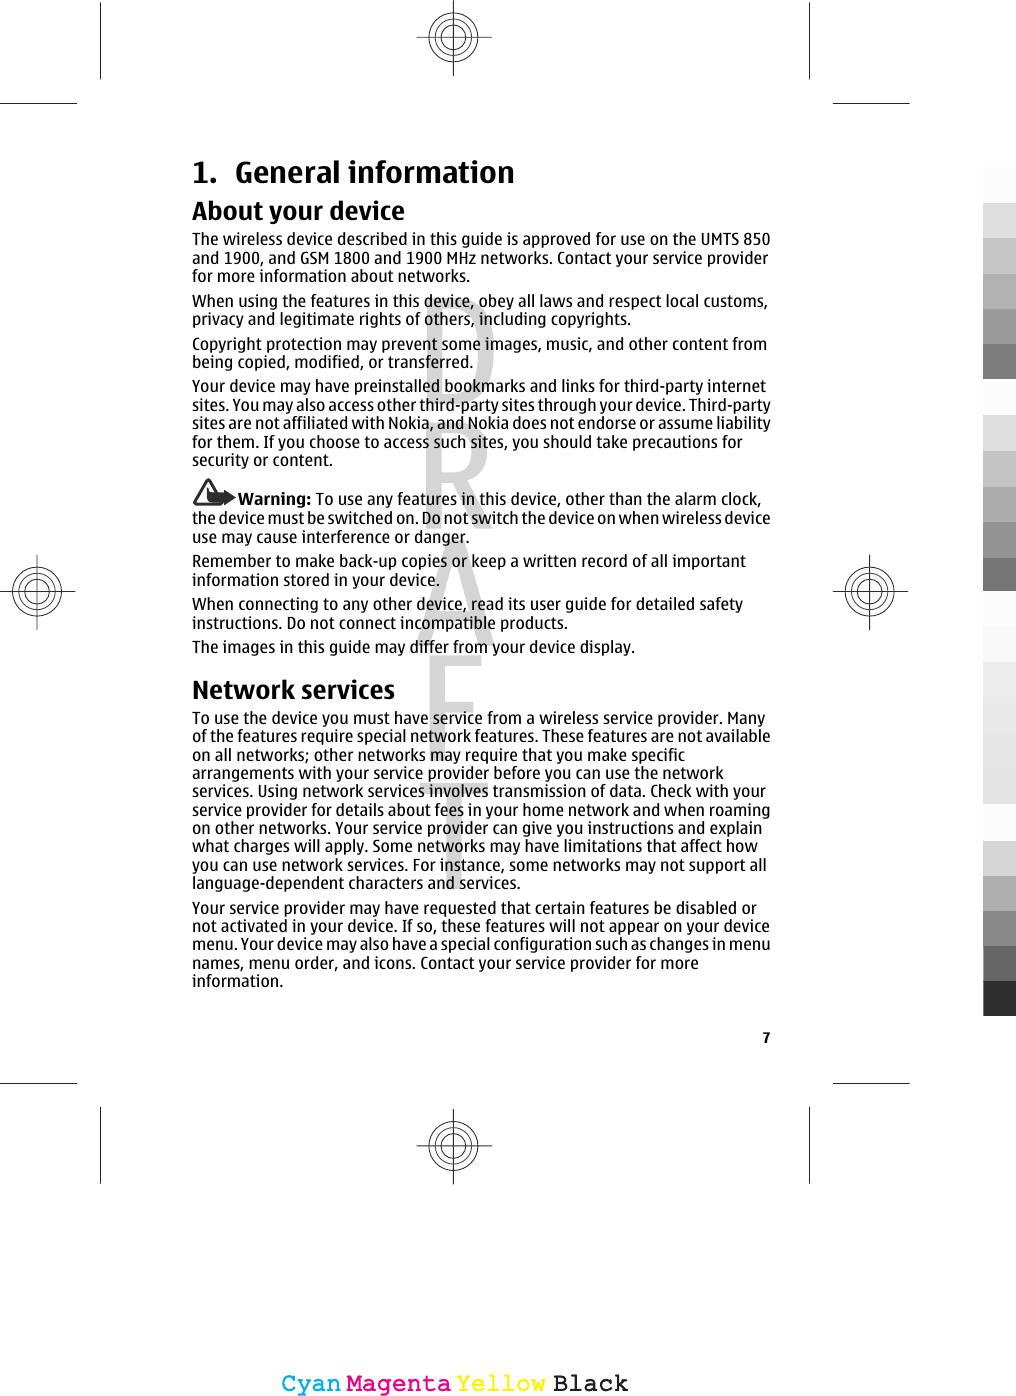 1. General informationAbout your deviceThe wireless device described in this guide is approved for use on the UMTS 850and 1900, and GSM 1800 and 1900 MHz networks. Contact your service providerfor more information about networks.When using the features in this device, obey all laws and respect local customs,privacy and legitimate rights of others, including copyrights.Copyright protection may prevent some images, music, and other content frombeing copied, modified, or transferred.Your device may have preinstalled bookmarks and links for third-party internetsites. You may also access other third-party sites through your device. Third-partysites are not affiliated with Nokia, and Nokia does not endorse or assume liabilityfor them. If you choose to access such sites, you should take precautions forsecurity or content.Warning: To use any features in this device, other than the alarm clock,the device must be switched on. Do not switch the device on when wireless deviceuse may cause interference or danger.Remember to make back-up copies or keep a written record of all importantinformation stored in your device.When connecting to any other device, read its user guide for detailed safetyinstructions. Do not connect incompatible products.The images in this guide may differ from your device display.Network servicesTo use the device you must have service from a wireless service provider. Manyof the features require special network features. These features are not availableon all networks; other networks may require that you make specificarrangements with your service provider before you can use the networkservices. Using network services involves transmission of data. Check with yourservice provider for details about fees in your home network and when roamingon other networks. Your service provider can give you instructions and explainwhat charges will apply. Some networks may have limitations that affect howyou can use network services. For instance, some networks may not support alllanguage-dependent characters and services.Your service provider may have requested that certain features be disabled ornot activated in your device. If so, these features will not appear on your devicemenu. Your device may also have a special configuration such as changes in menunames, menu order, and icons. Contact your service provider for moreinformation.7CyanCyanMagentaMagentaYellowYellowBlackBlack